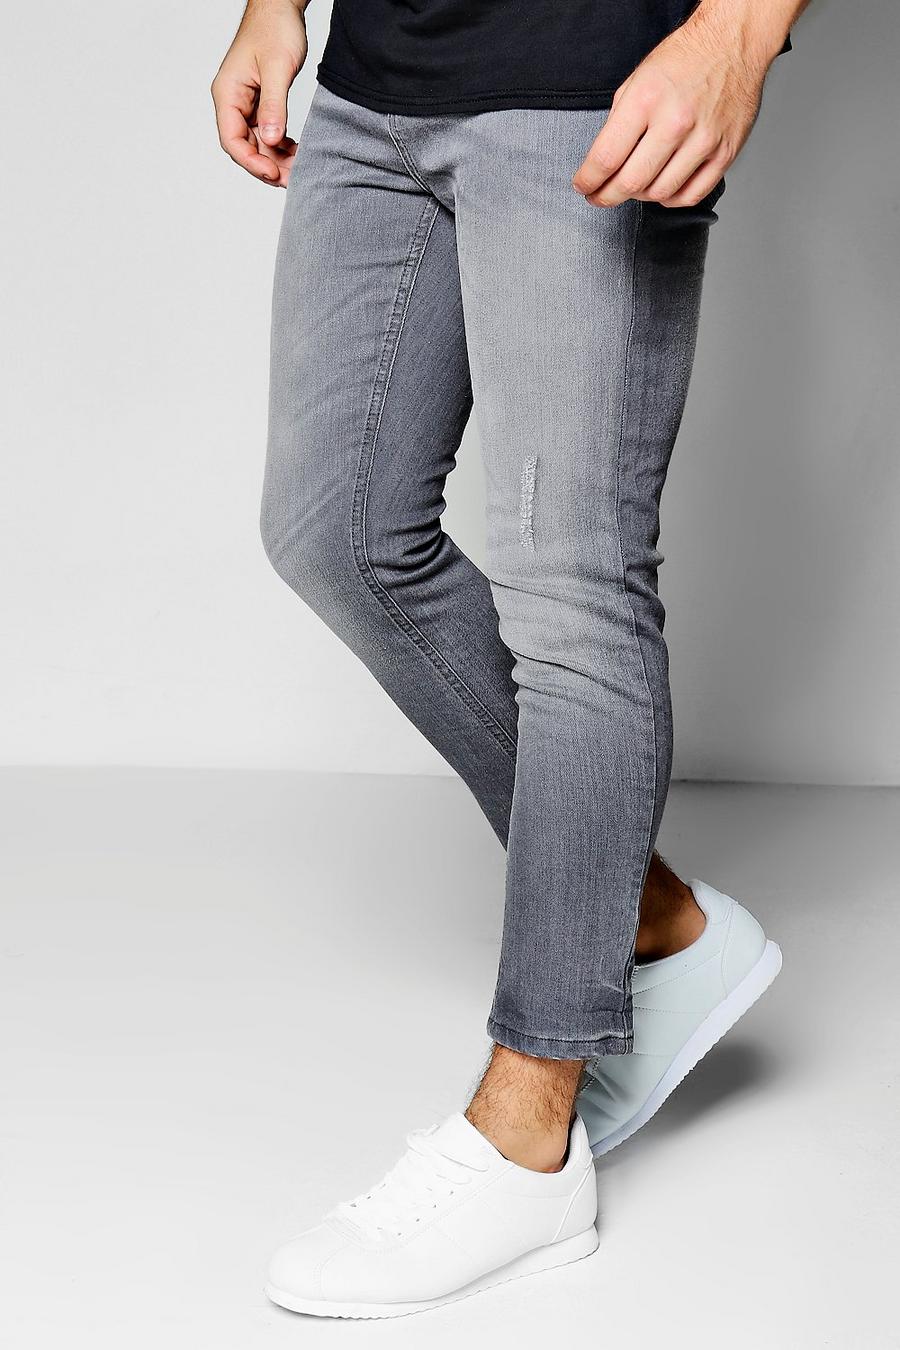 Men's Skinny Fit Stretch Cropped Jeans |